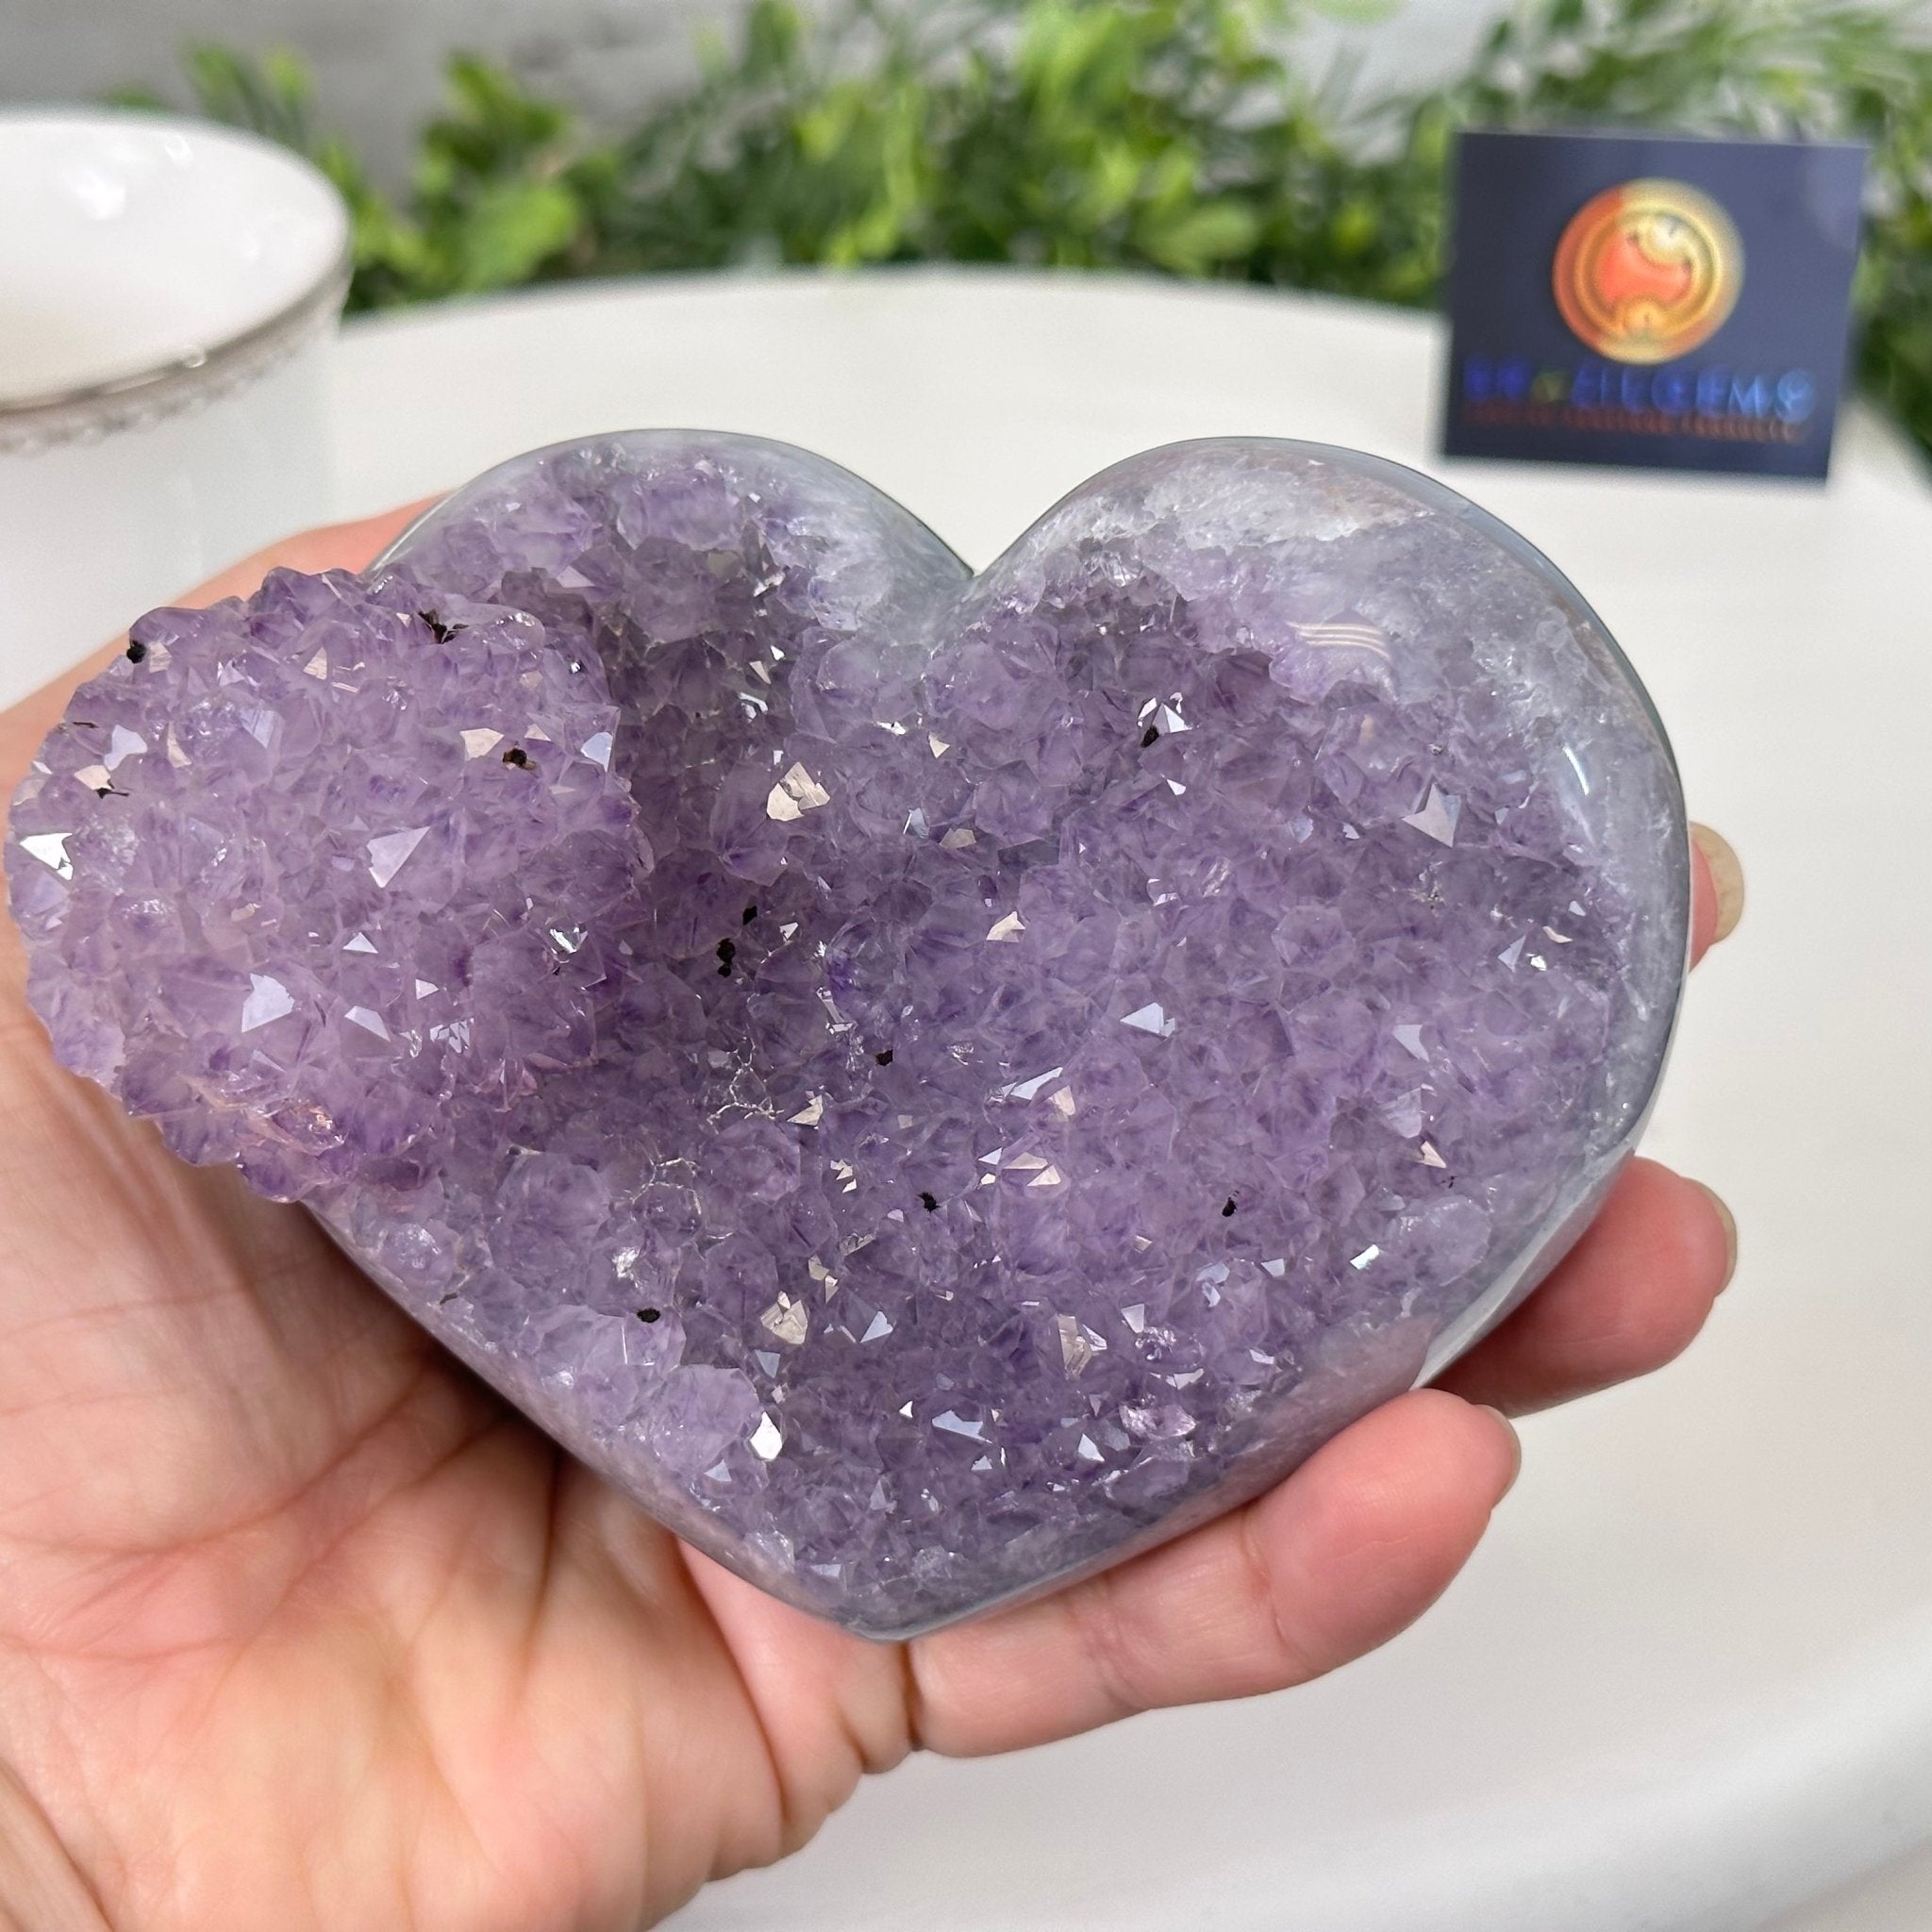 Extra Quality Amethyst Heart Geode on an Acrylic Stand 1.65 lbs & 3.25" Tall #5462-0098 by Brazil Gems - Brazil GemsBrazil GemsExtra Quality Amethyst Heart Geode on an Acrylic Stand 1.65 lbs & 3.25" Tall #5462-0098 by Brazil GemsHearts5462-0098